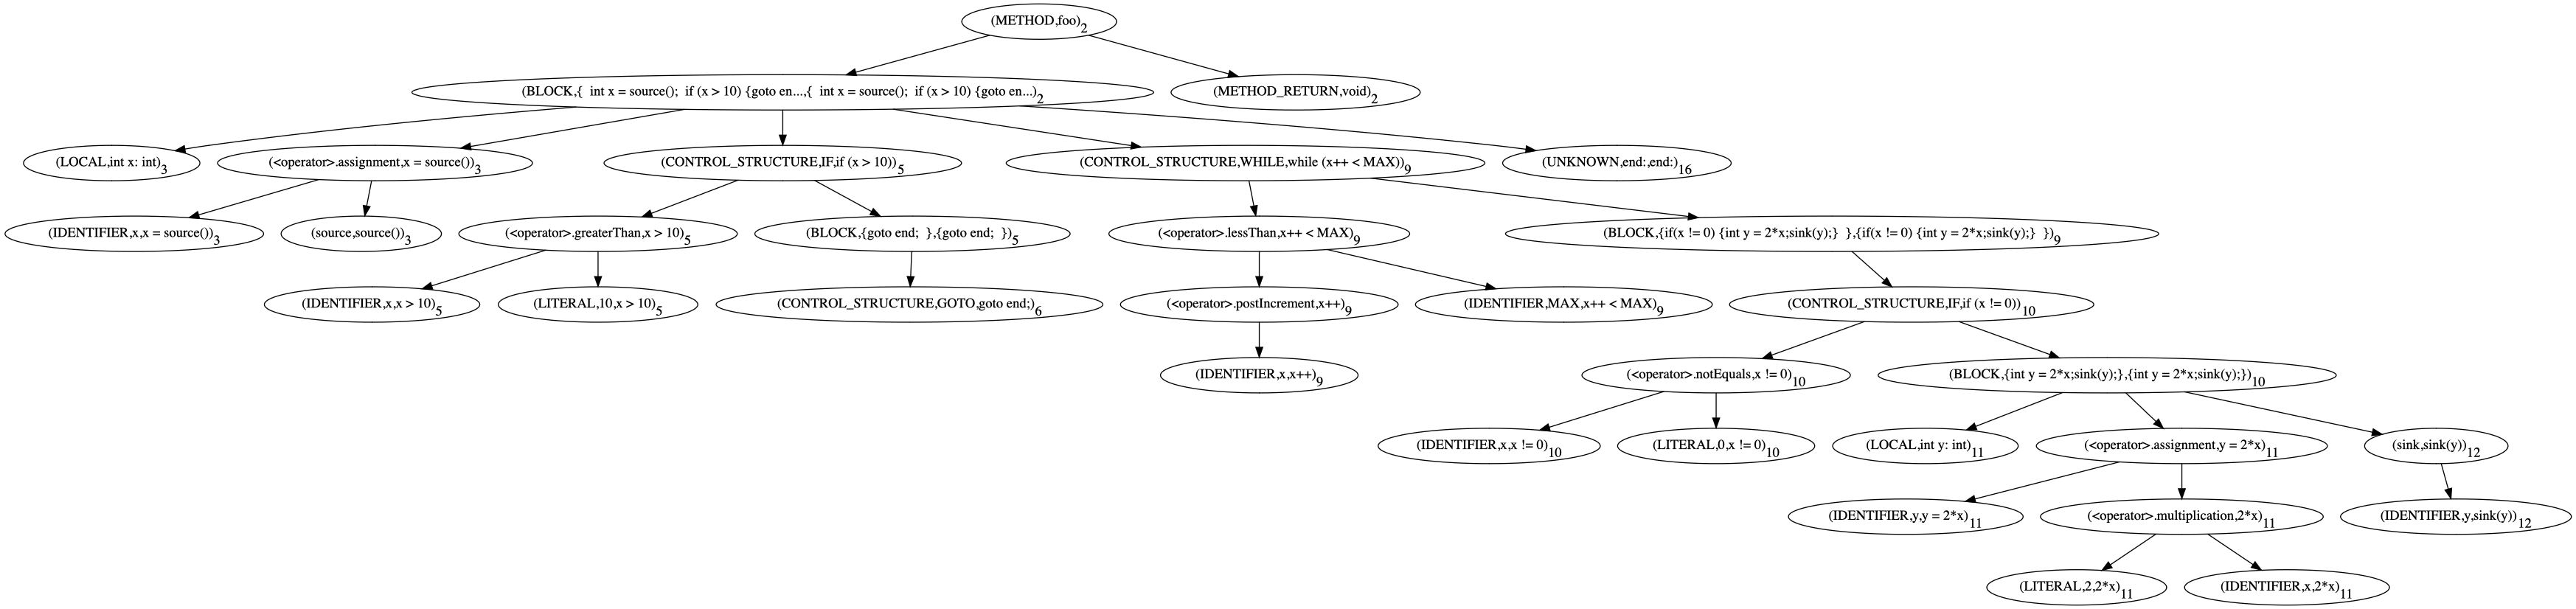 Fig.3: Abstract syntax tree containing structured and unstructured control structures